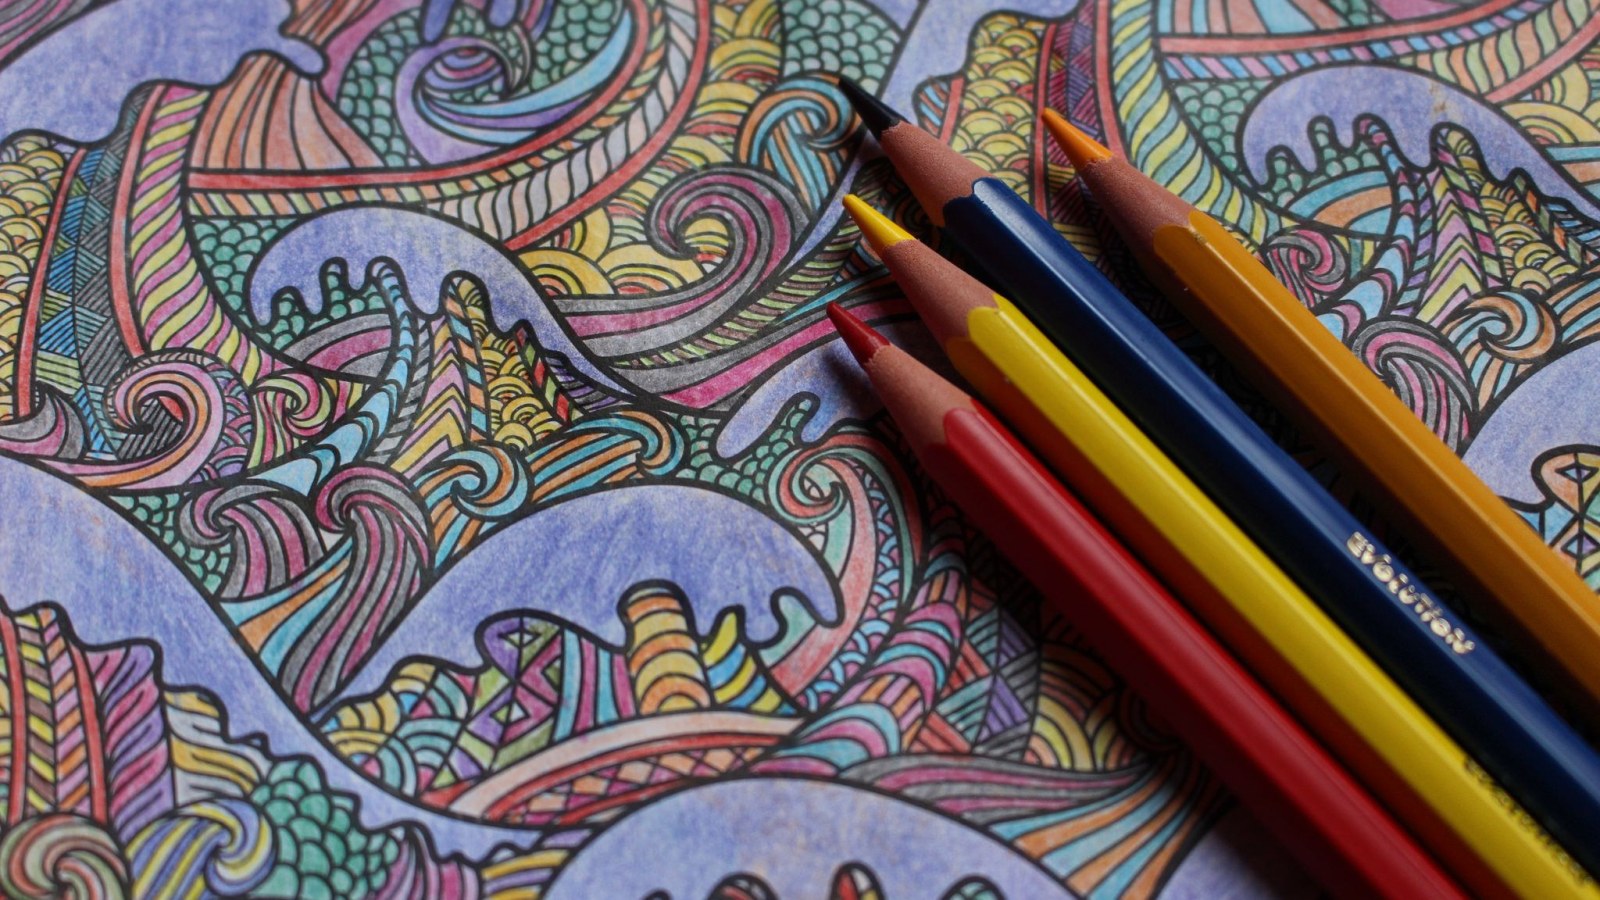 The Therapeutic Science Of Adult Coloring Books: How This